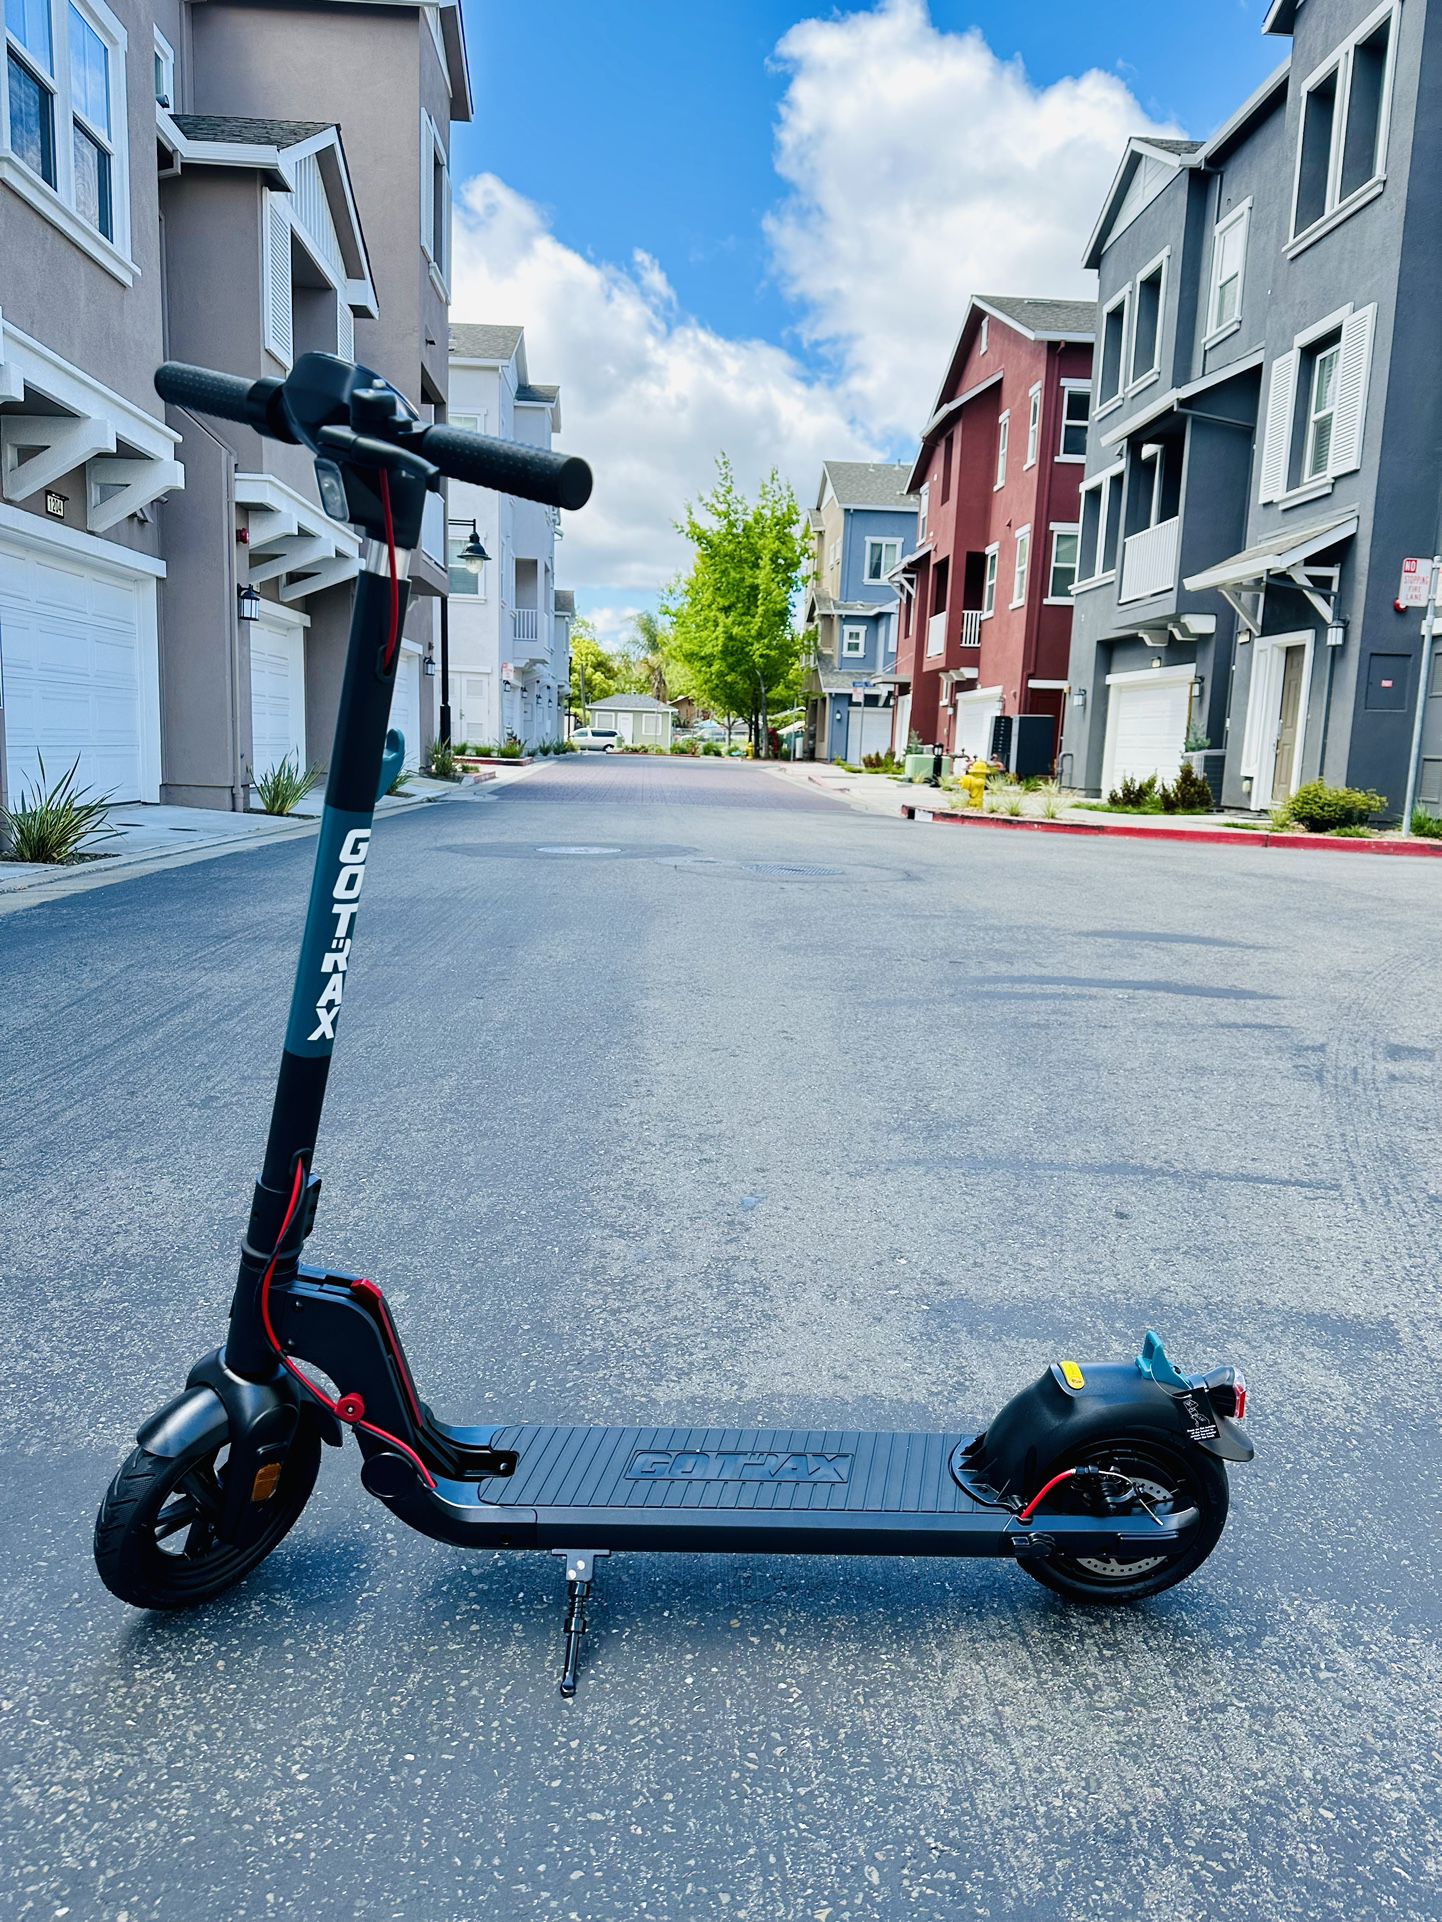 GoTrax Apex Pro - NEW Electric Scooter